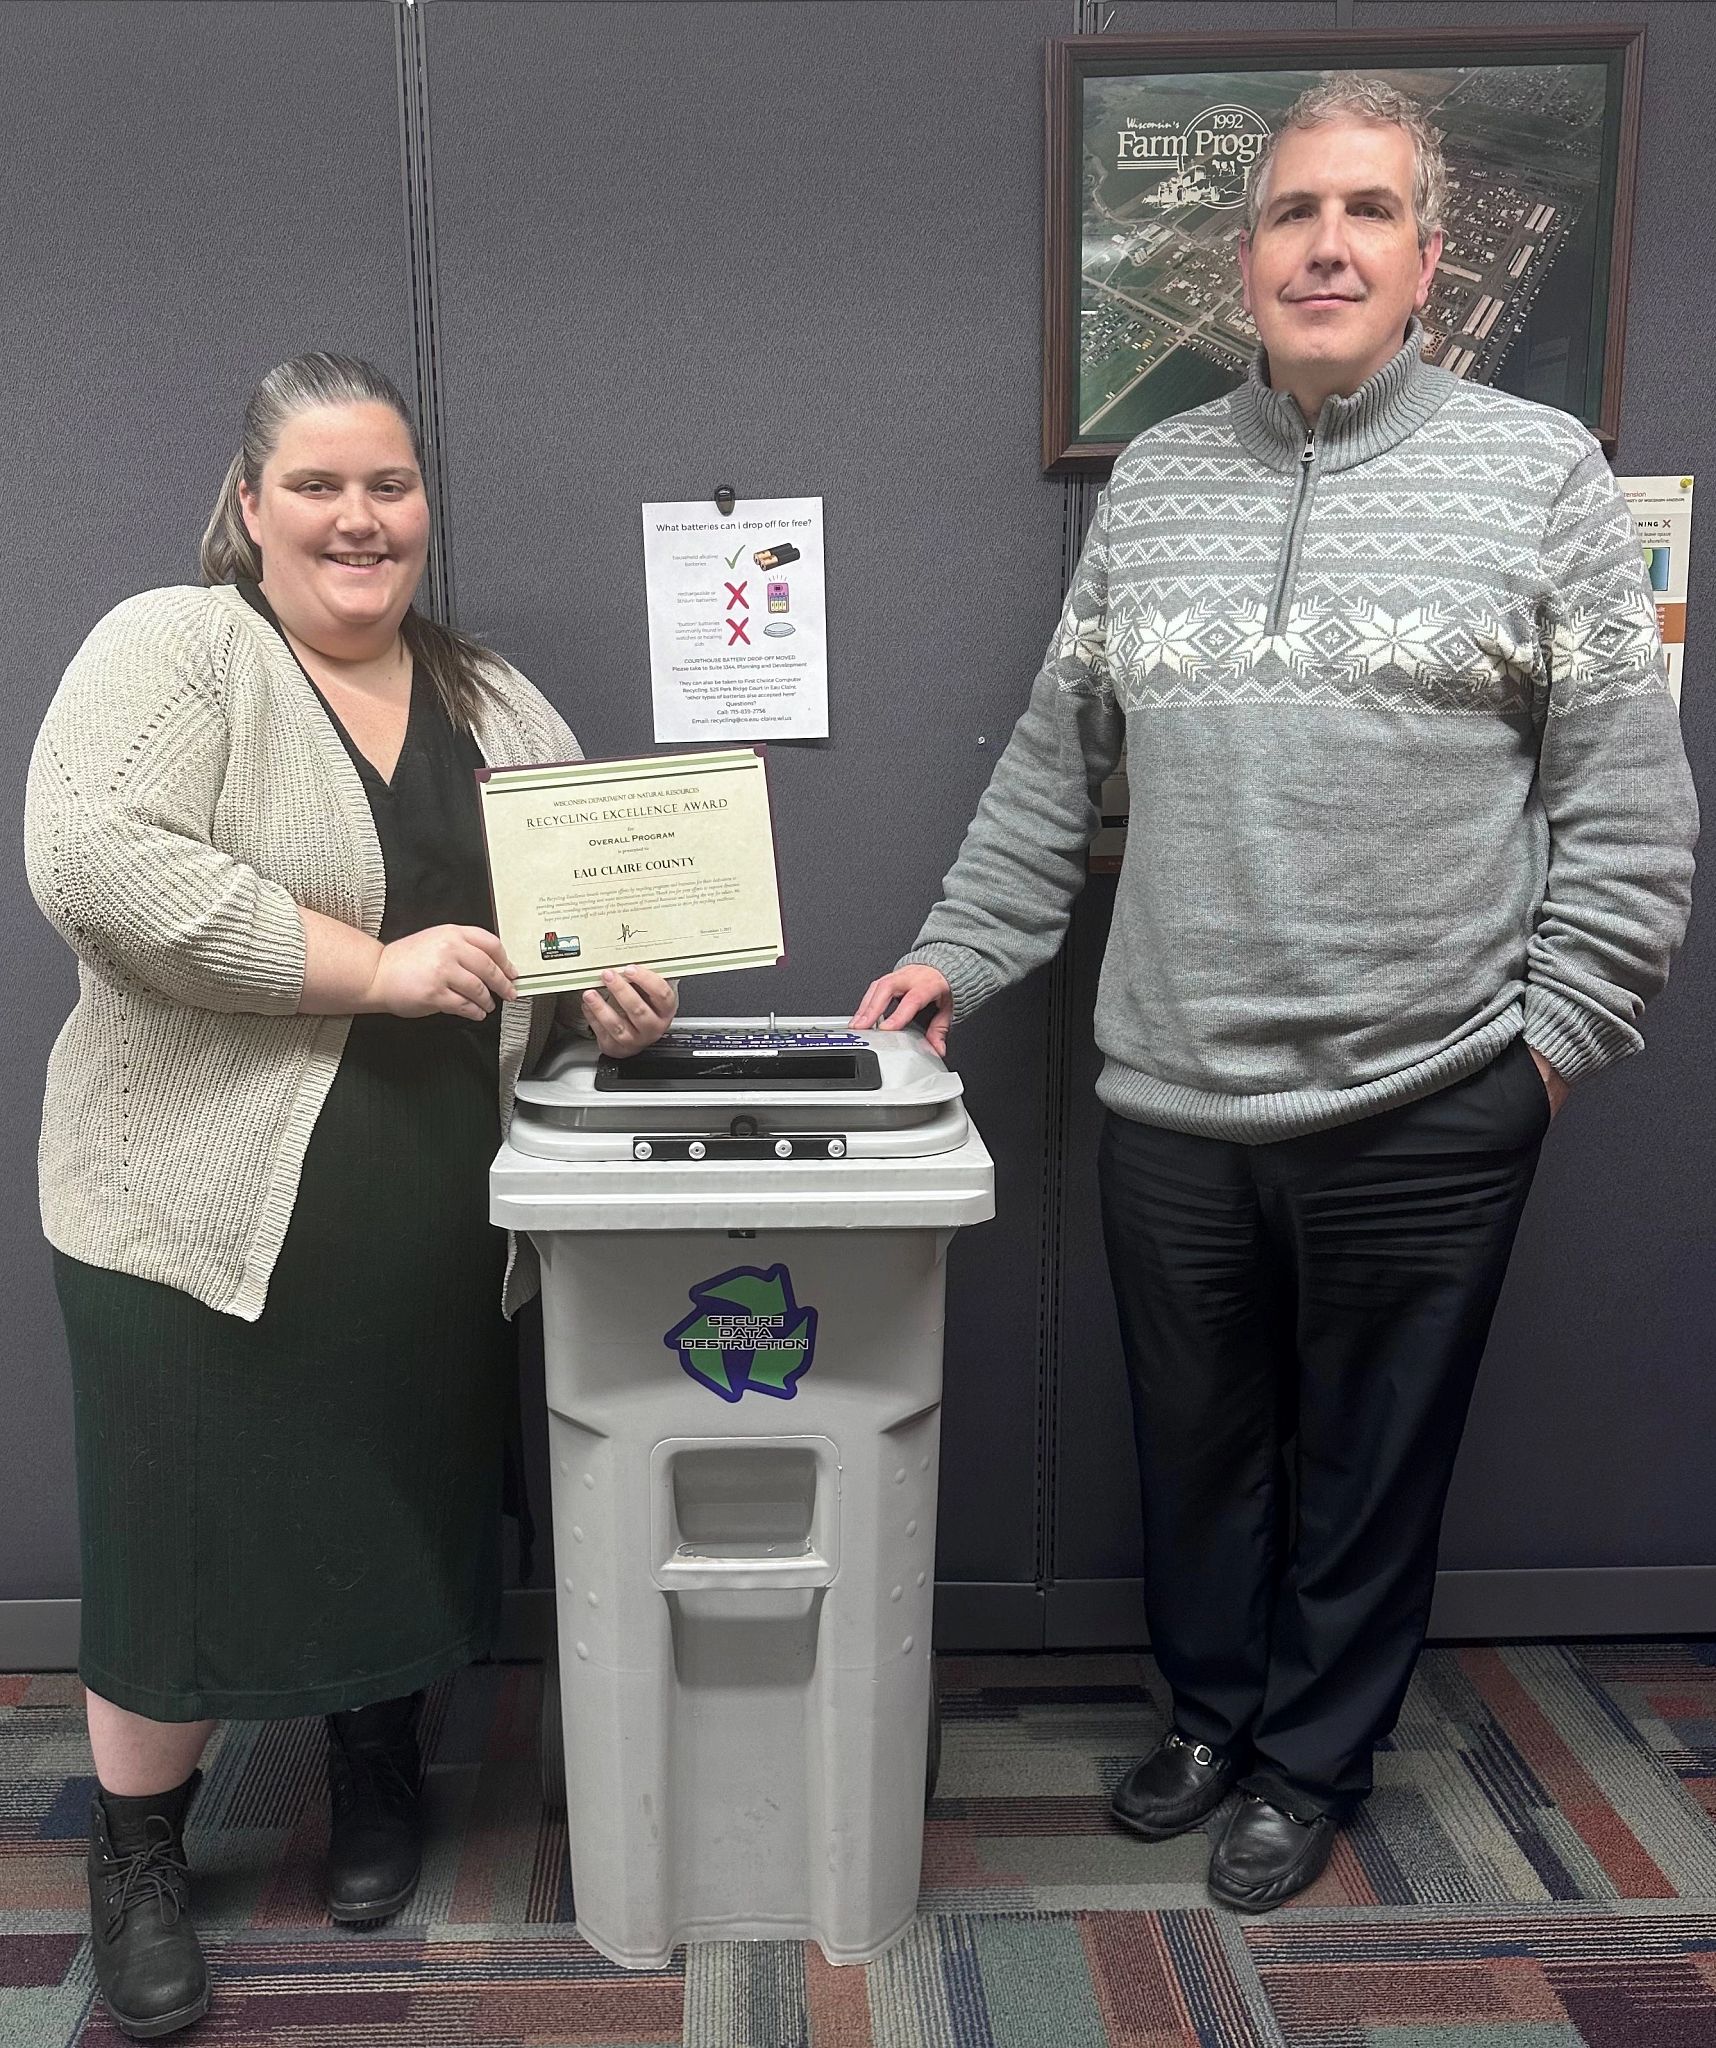 Two team members from Eau Claire County stand next to a white recycle bin and pose with the county's 2023 Wisconsin Recycling Excellence Award certificate from the DNR.